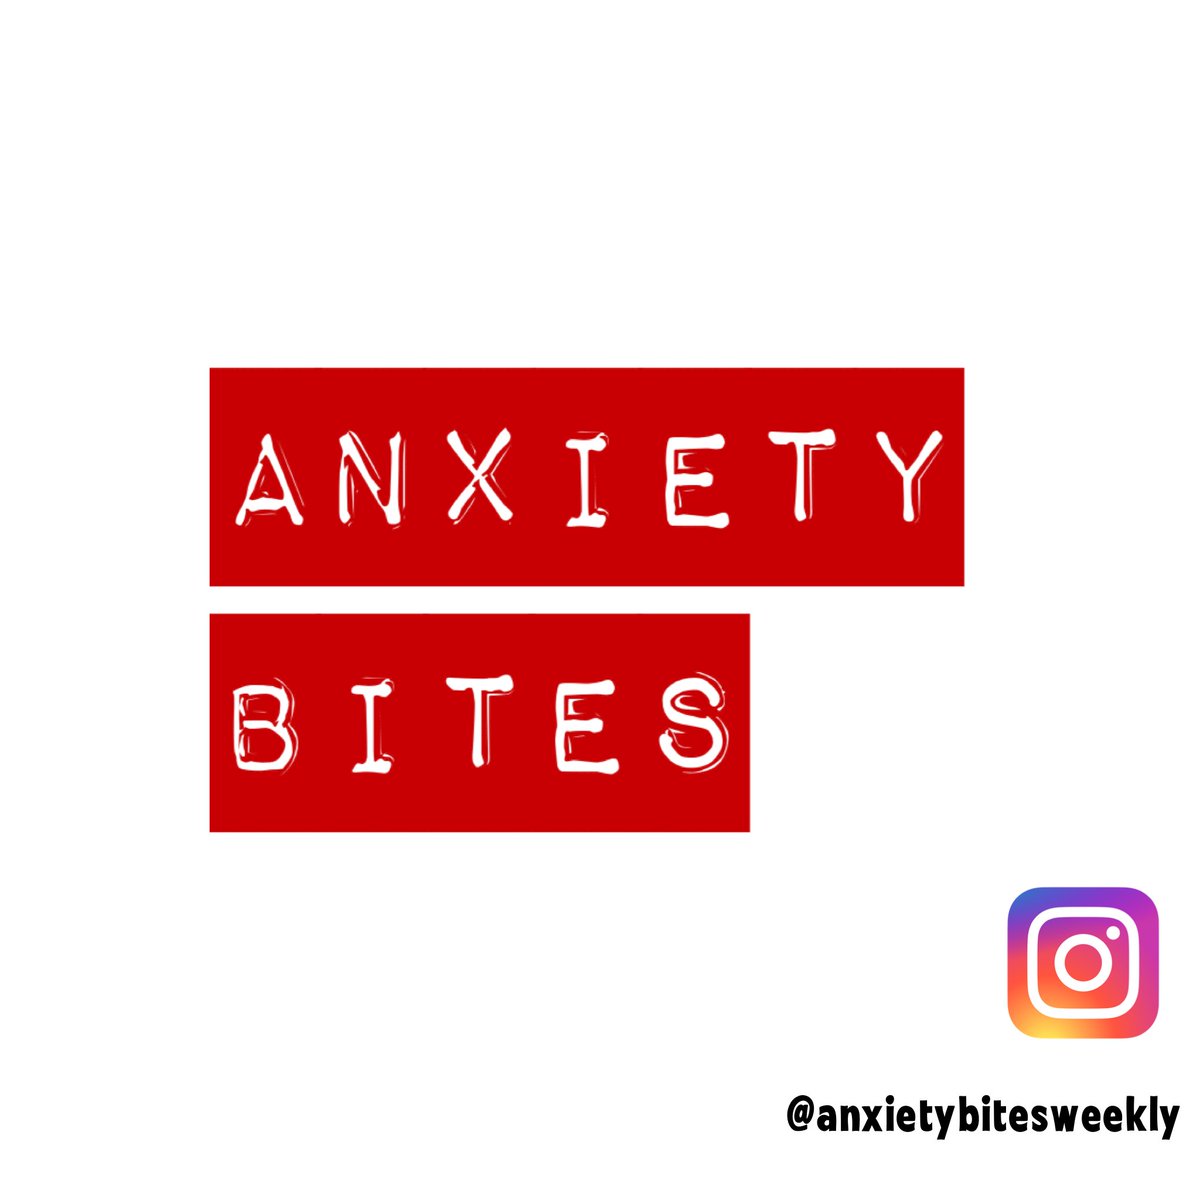 10/ ANXIETY BITES. I wrote a 55 page PDF booklet, a few newsletters, to help folks with anxiety. It's FREE & here:  http://jenkirkman.com/anxietybites  I accept donations for that work at  http://buymeacoffee.com/jenkirkman  or you can buy one of my relaxation classes $8 at:  https://tinyurl.com/7zp8ue96 